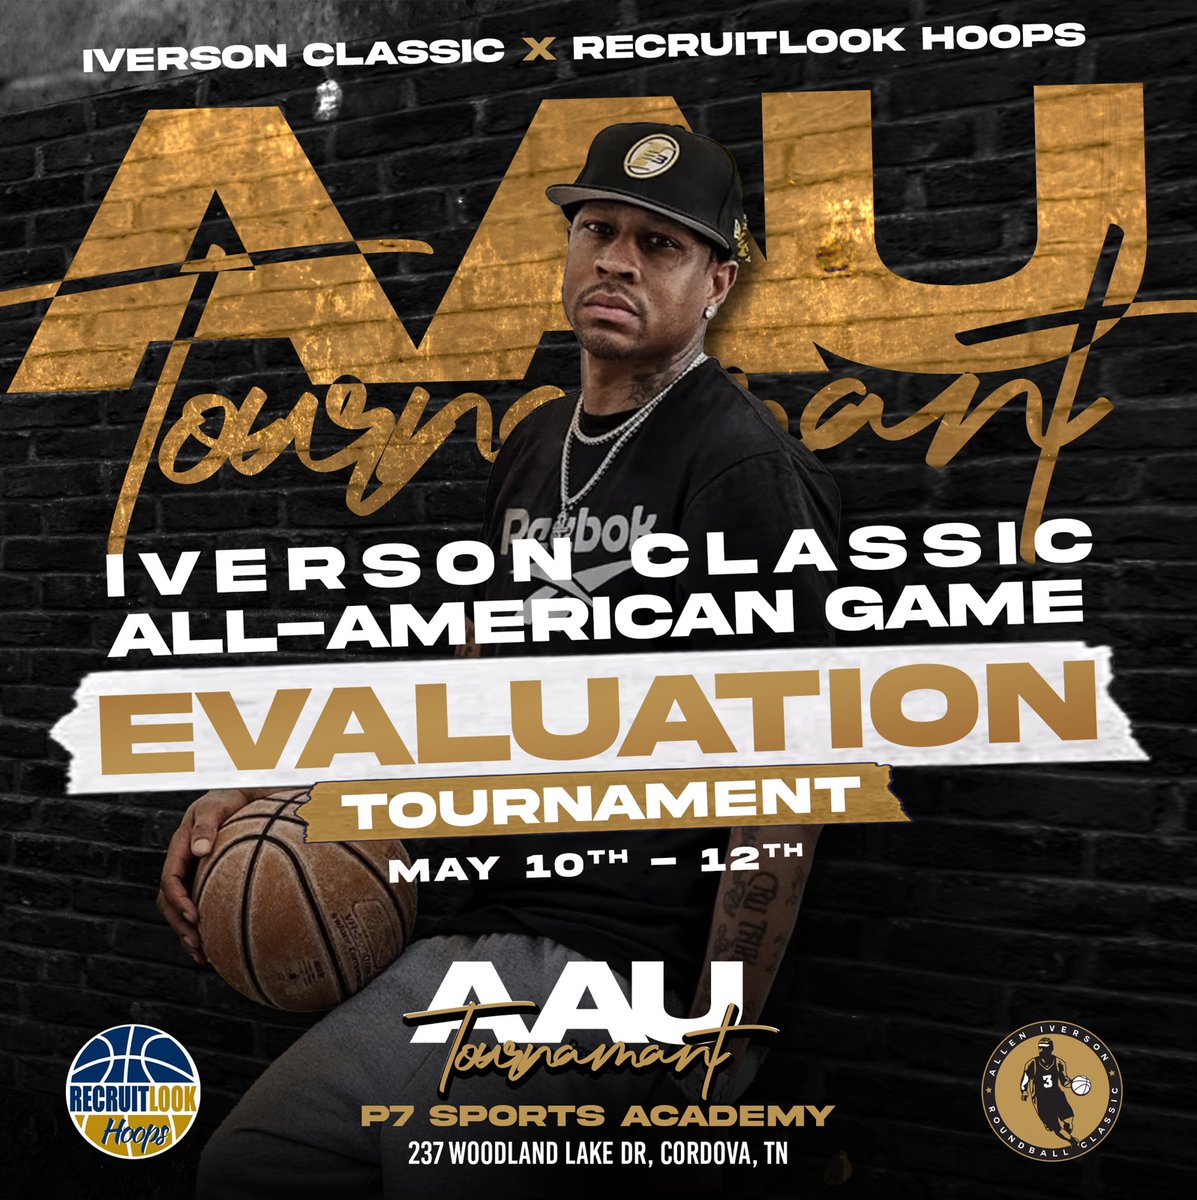 Memphis Showcase + Iverson Classic Evaluation A great event is going down this weekend in Memphis! Schedule: tourneymachine.com/Public/Results… Live Stream (@BallerTV): ballertv.com/events/memphis… Media: recruitlook.com/recruitlook-ho…